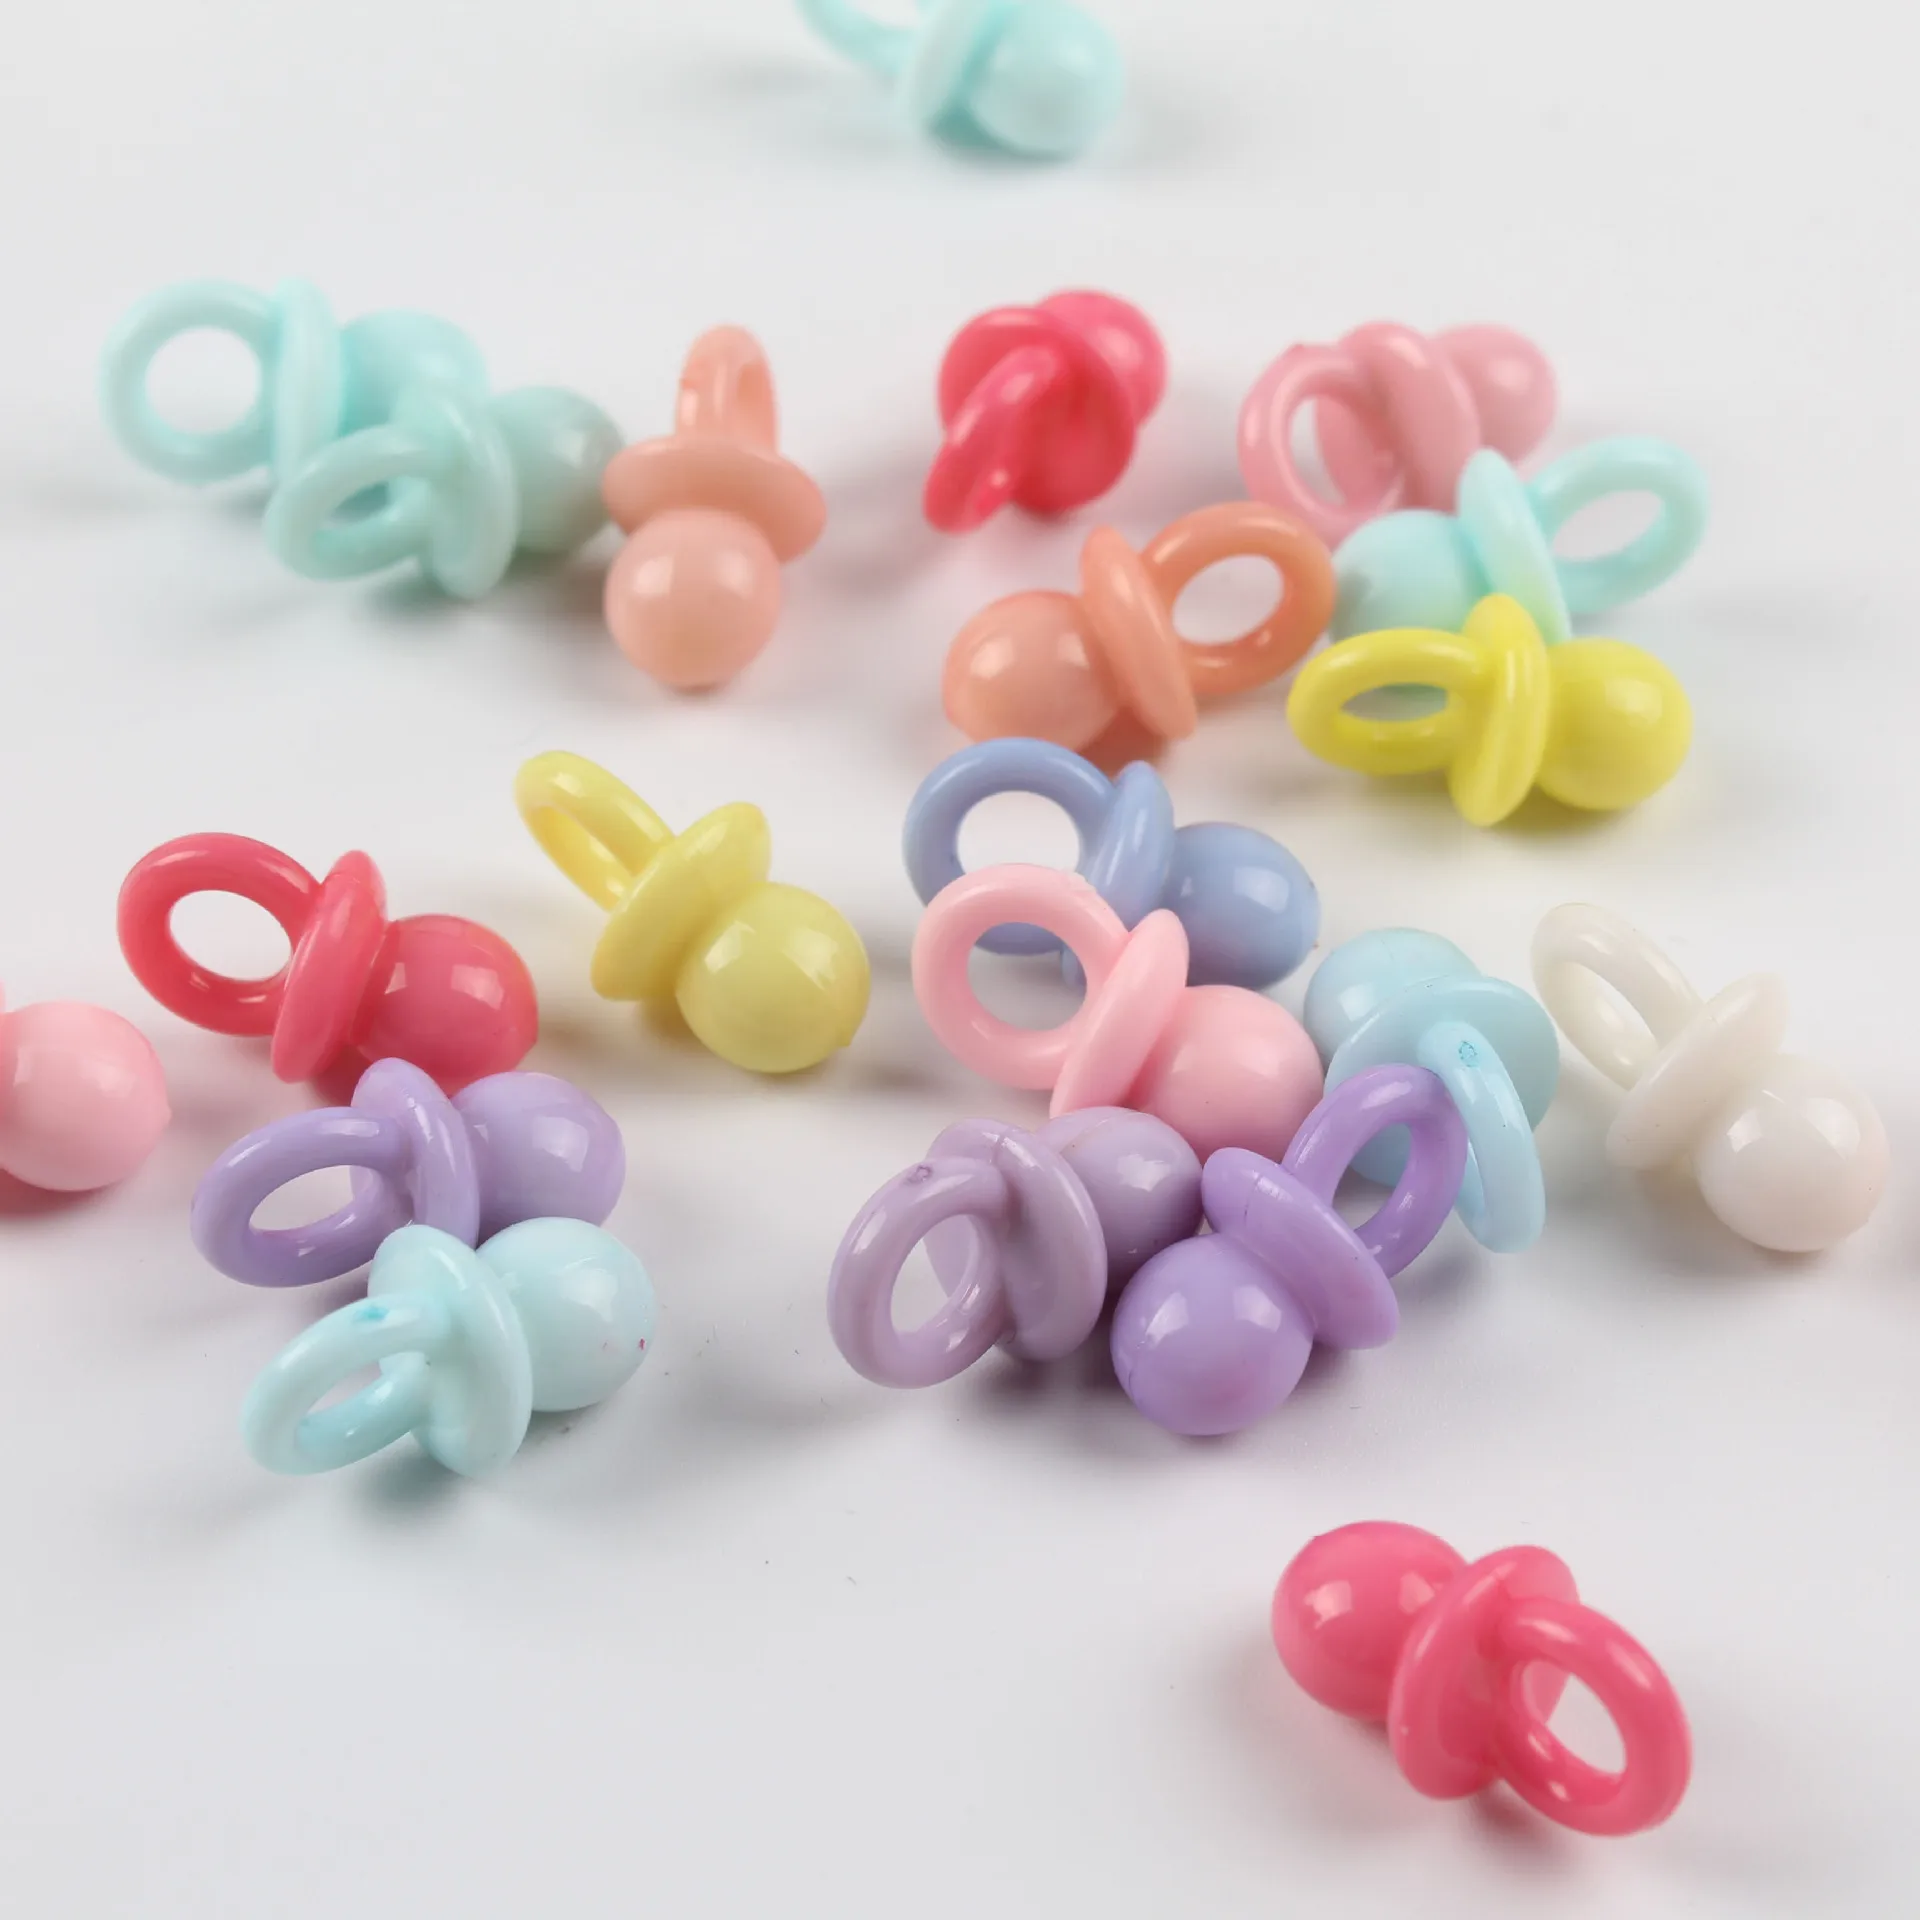 50 pcs Pacifiers Dummies for Baby Shower Christening Party Favor Table 